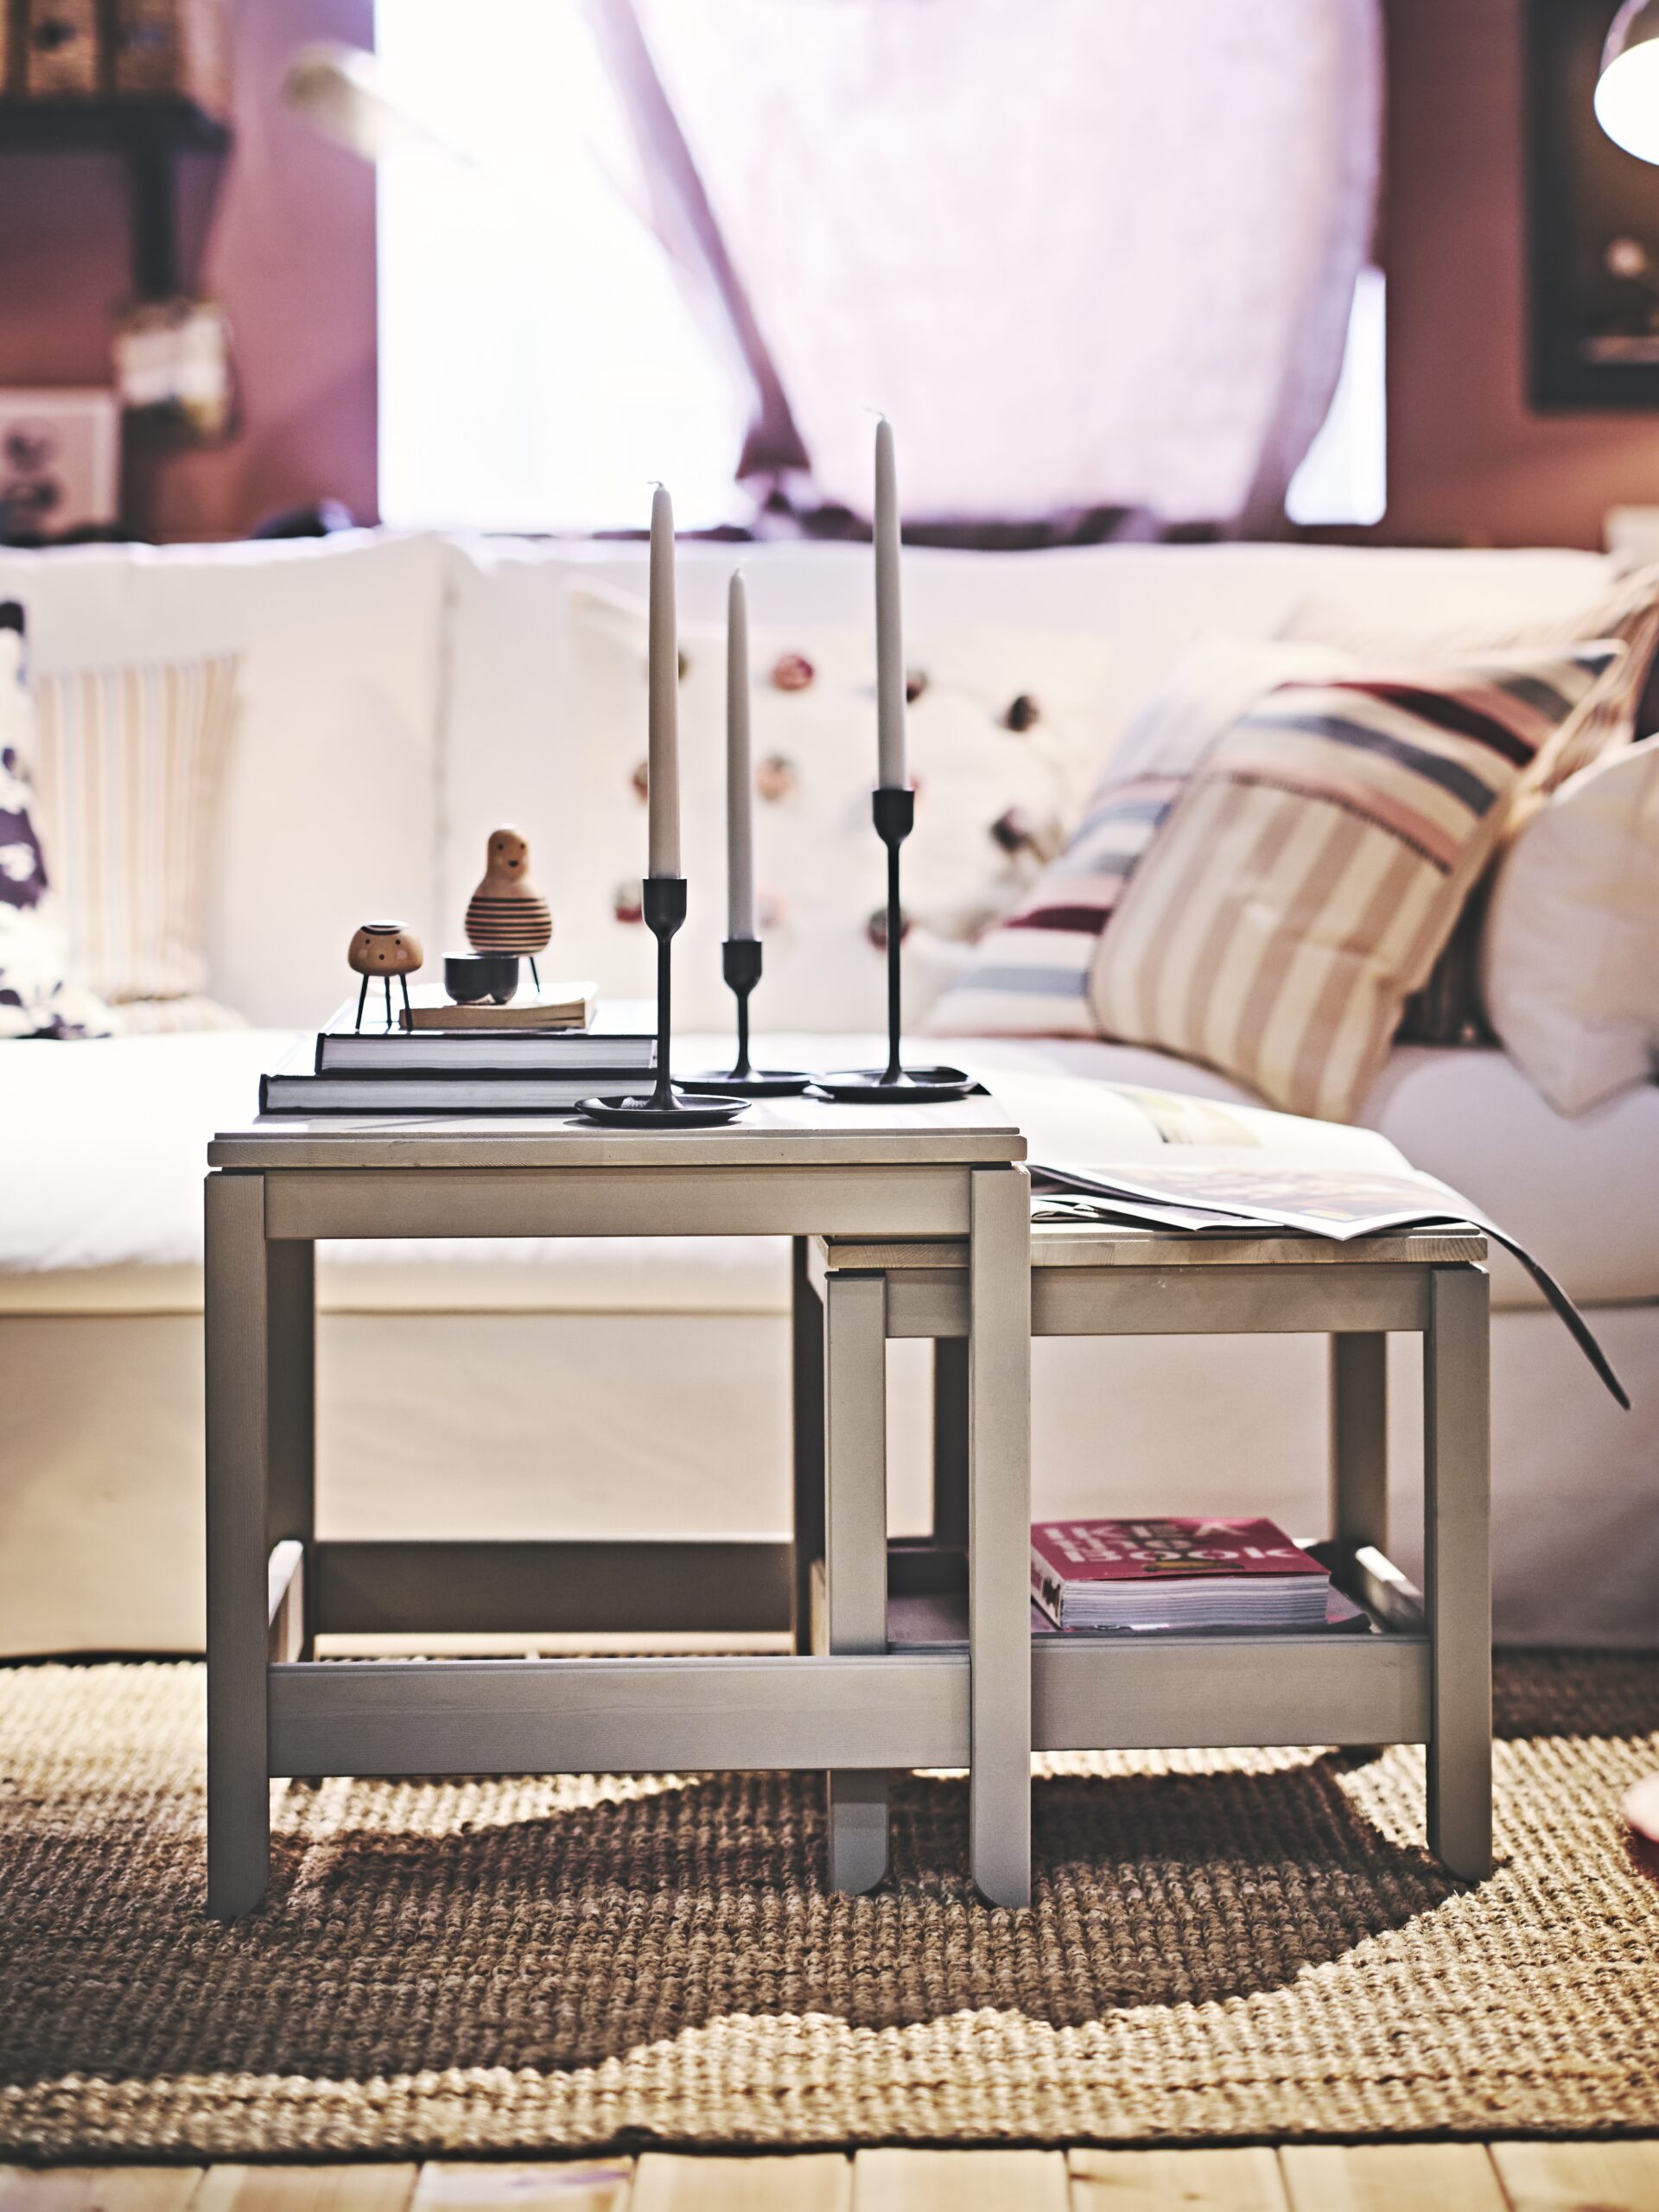 The Modular Coffee Table The ally of the small living room 